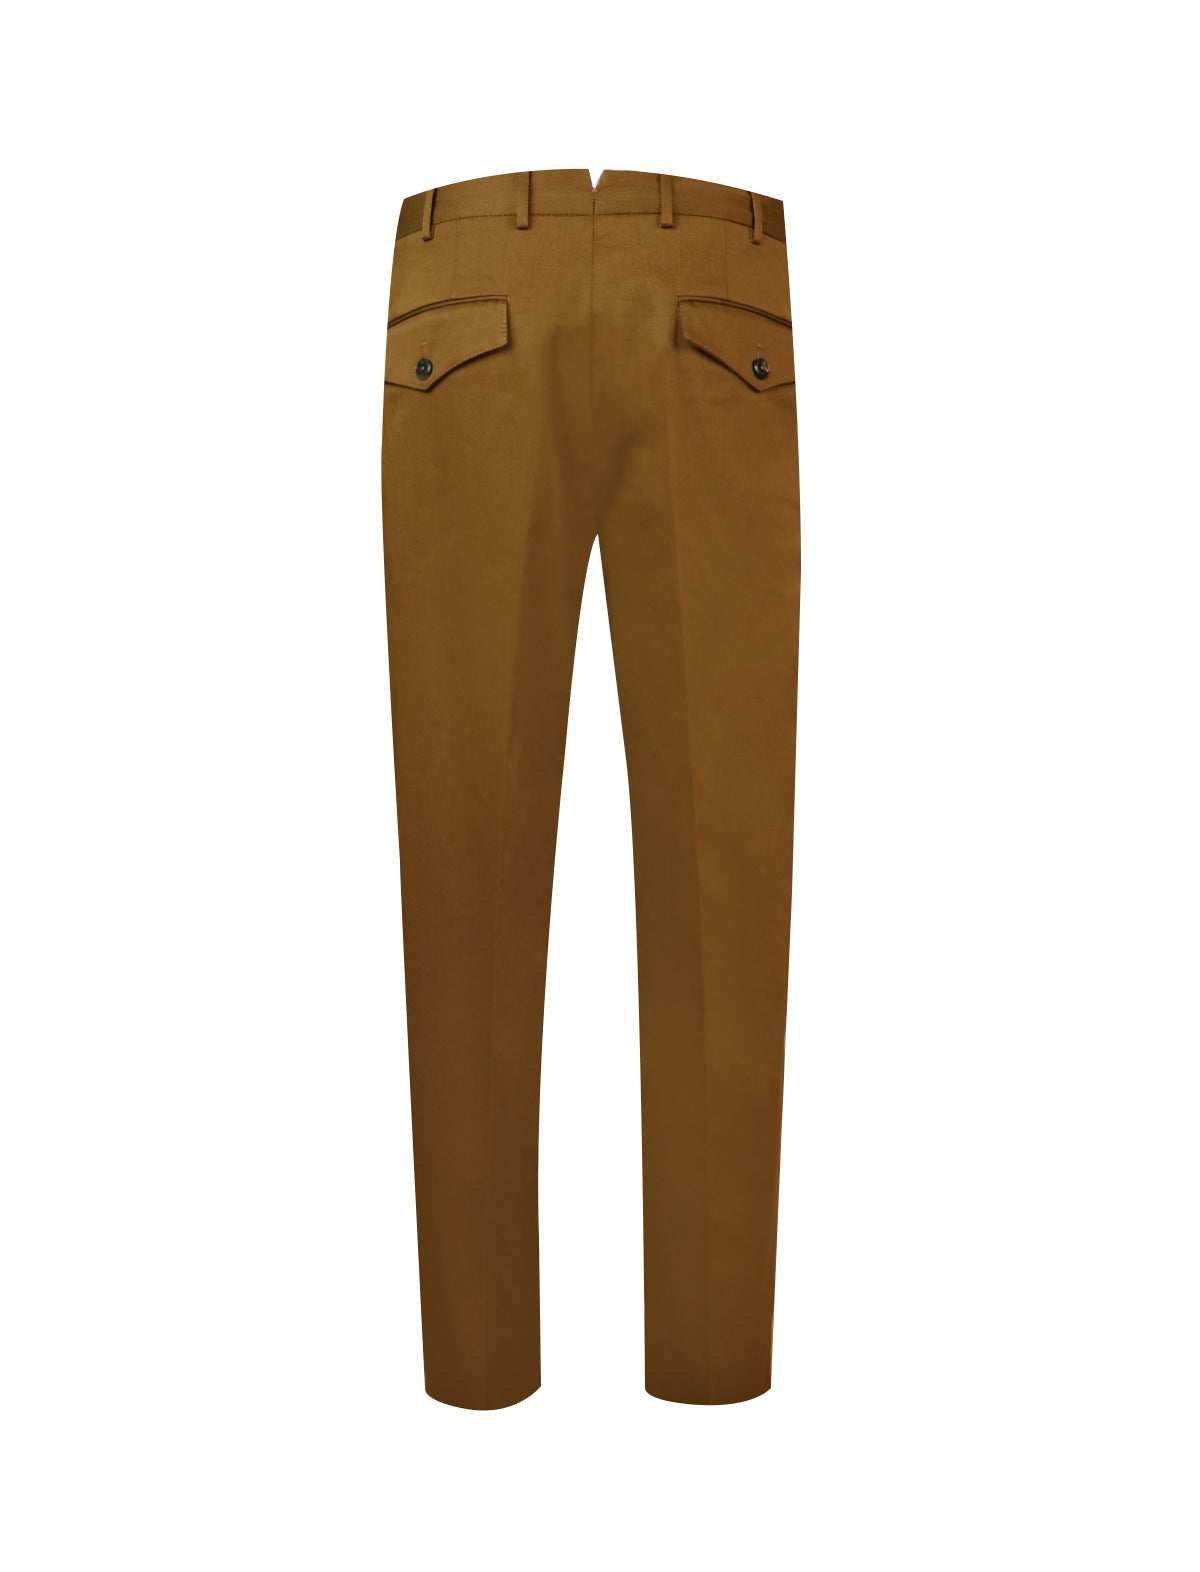 PT Torino Reworked Trouser in Brown